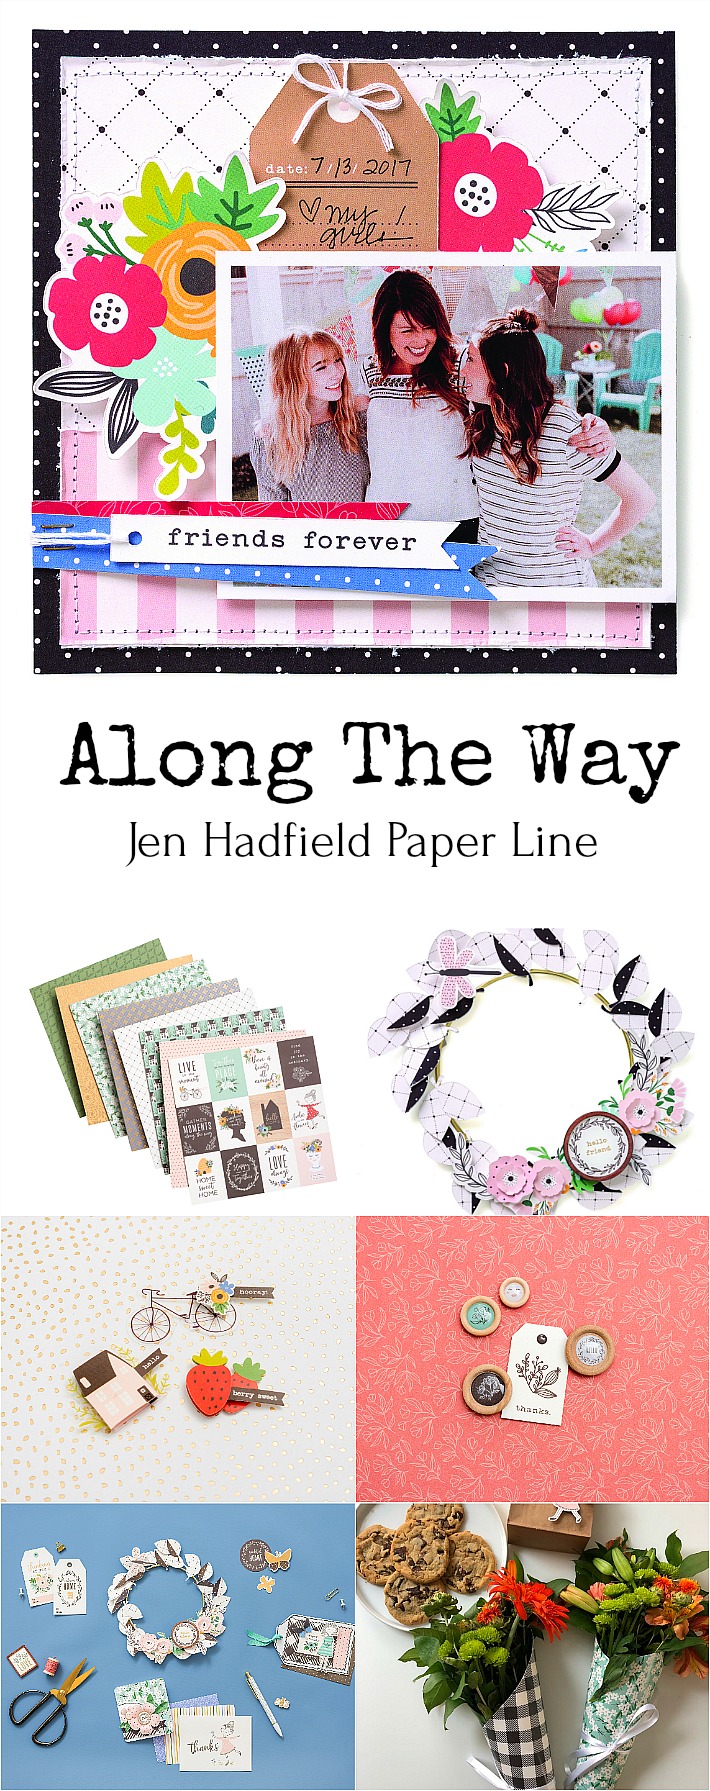 Jen Hadfield Along The Way is a happy line full of adorable icons, paper, tags and images that are perfect for scrapbooking, card-making, paper crafts and more! Come see the creative ideas! 